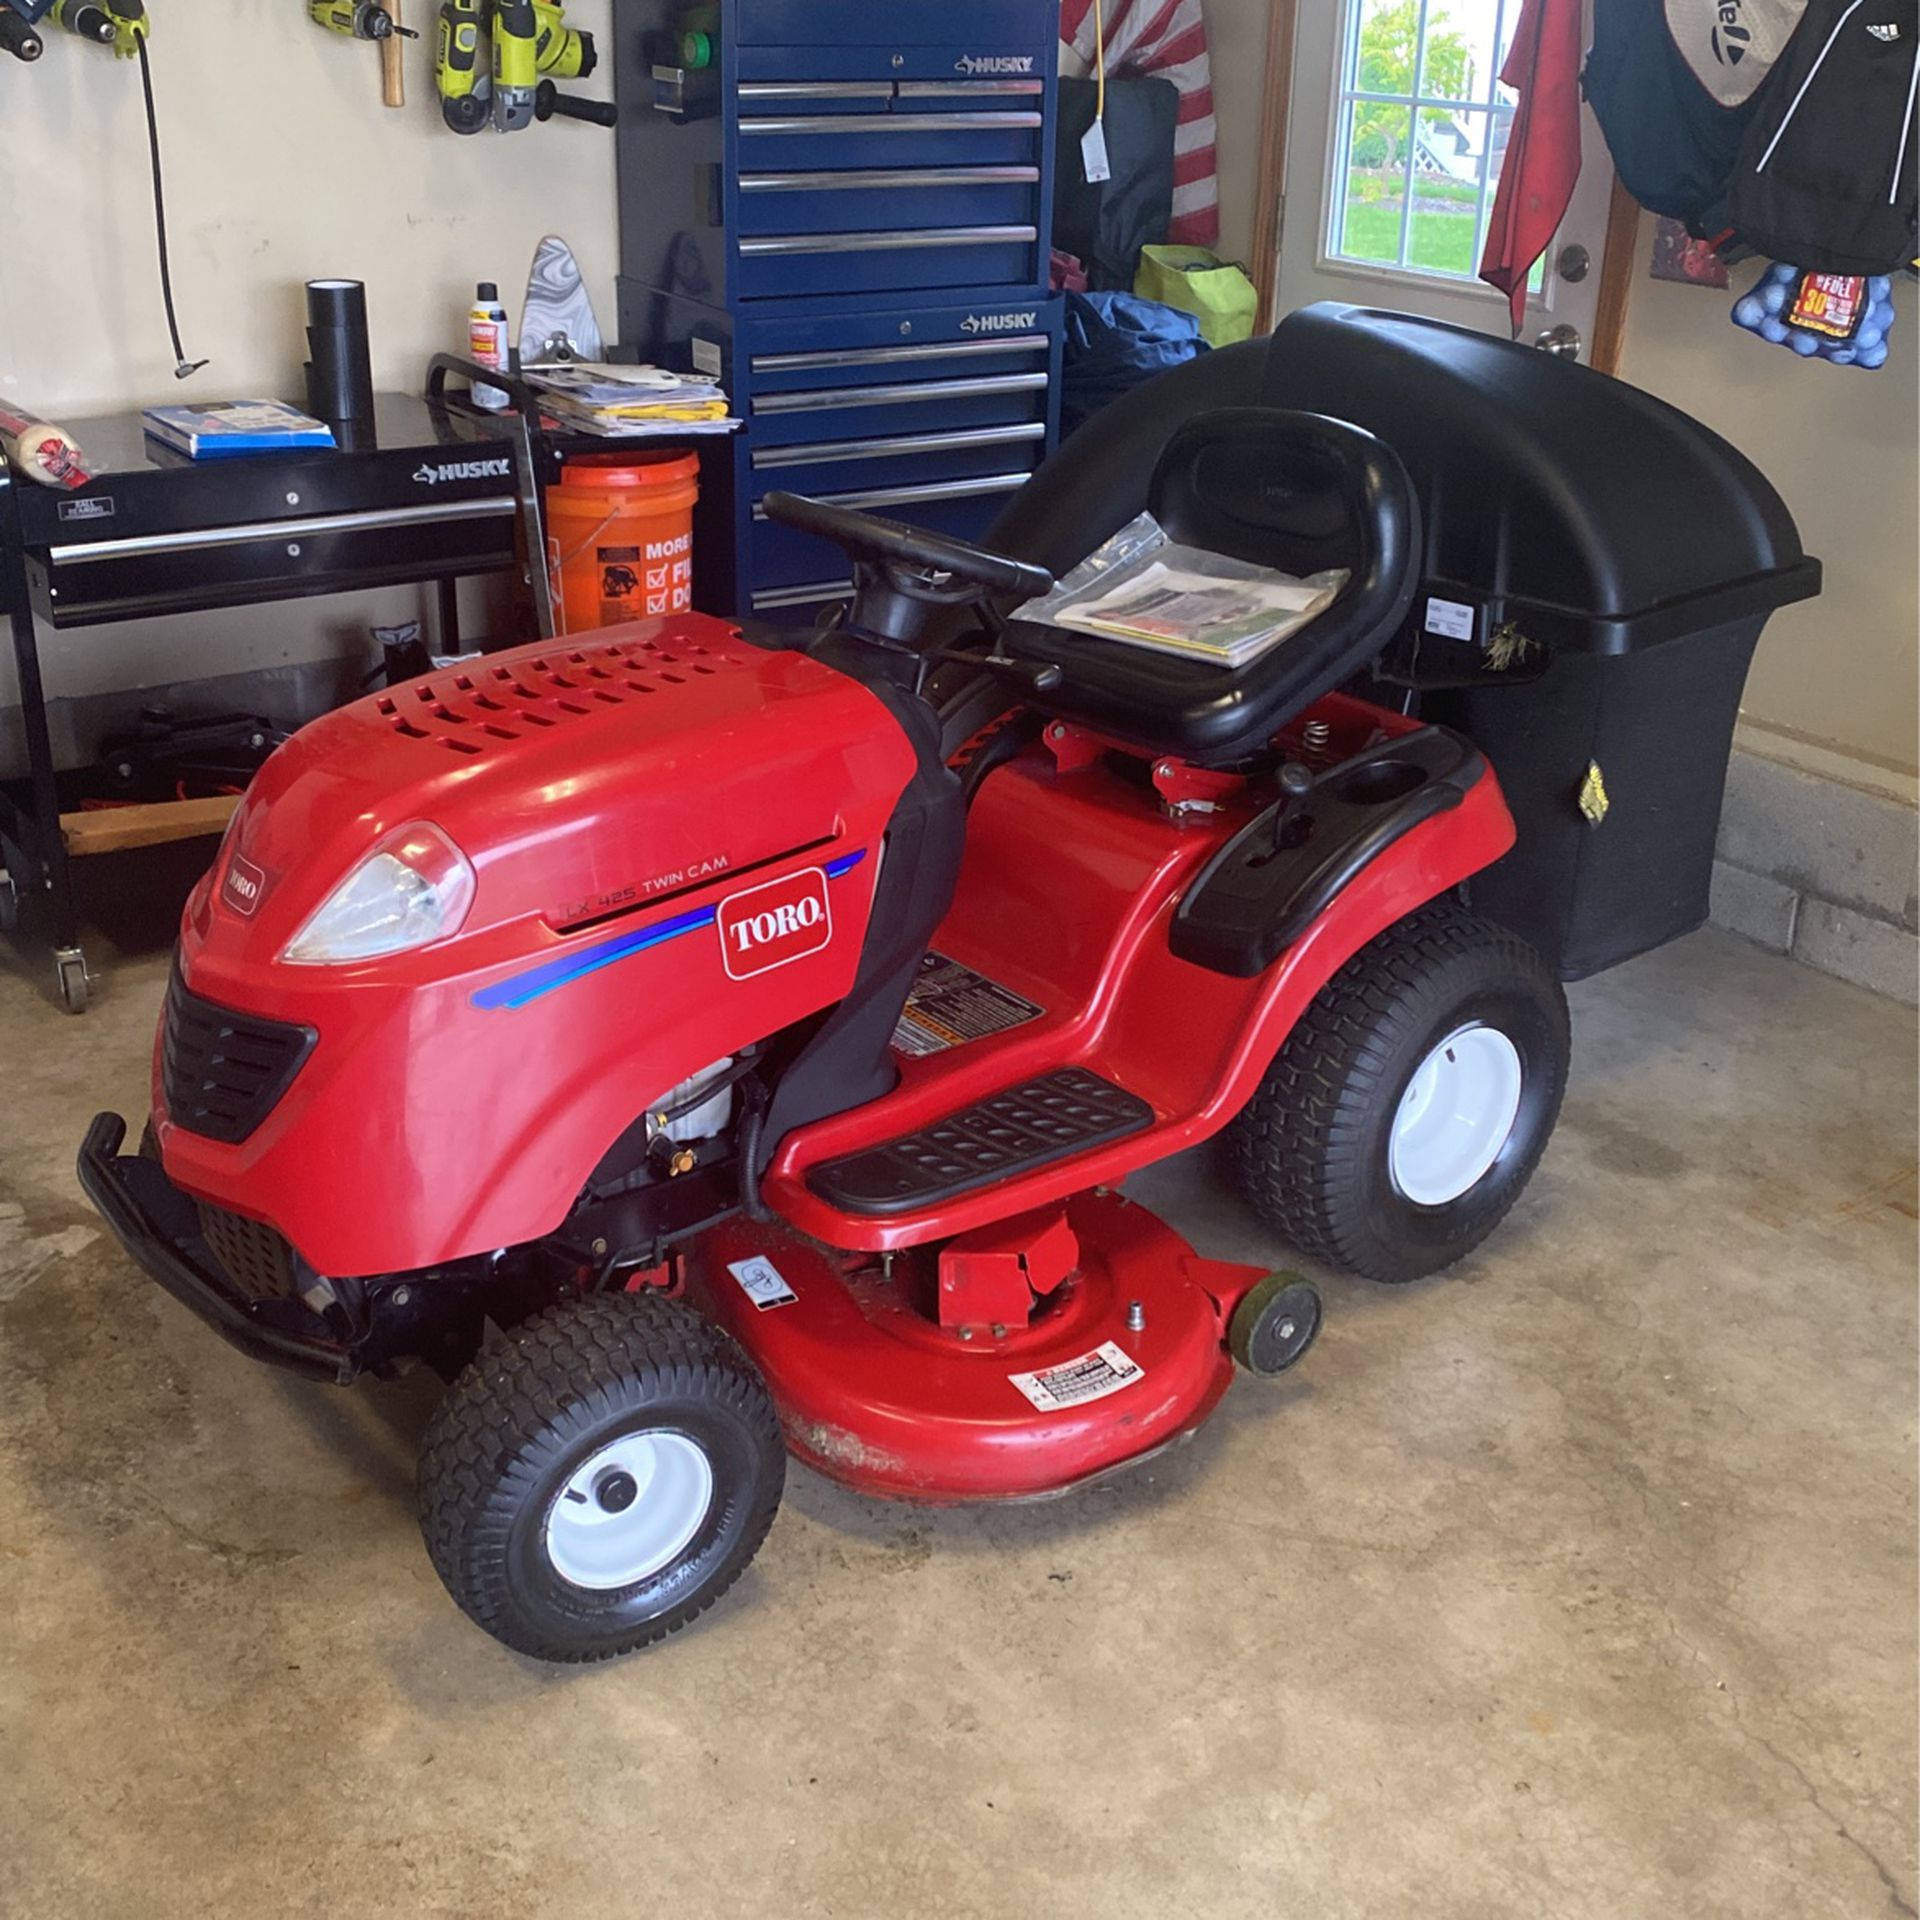 Toro Lx 425 Twin Cam Riding Mower  42” With Bagger 